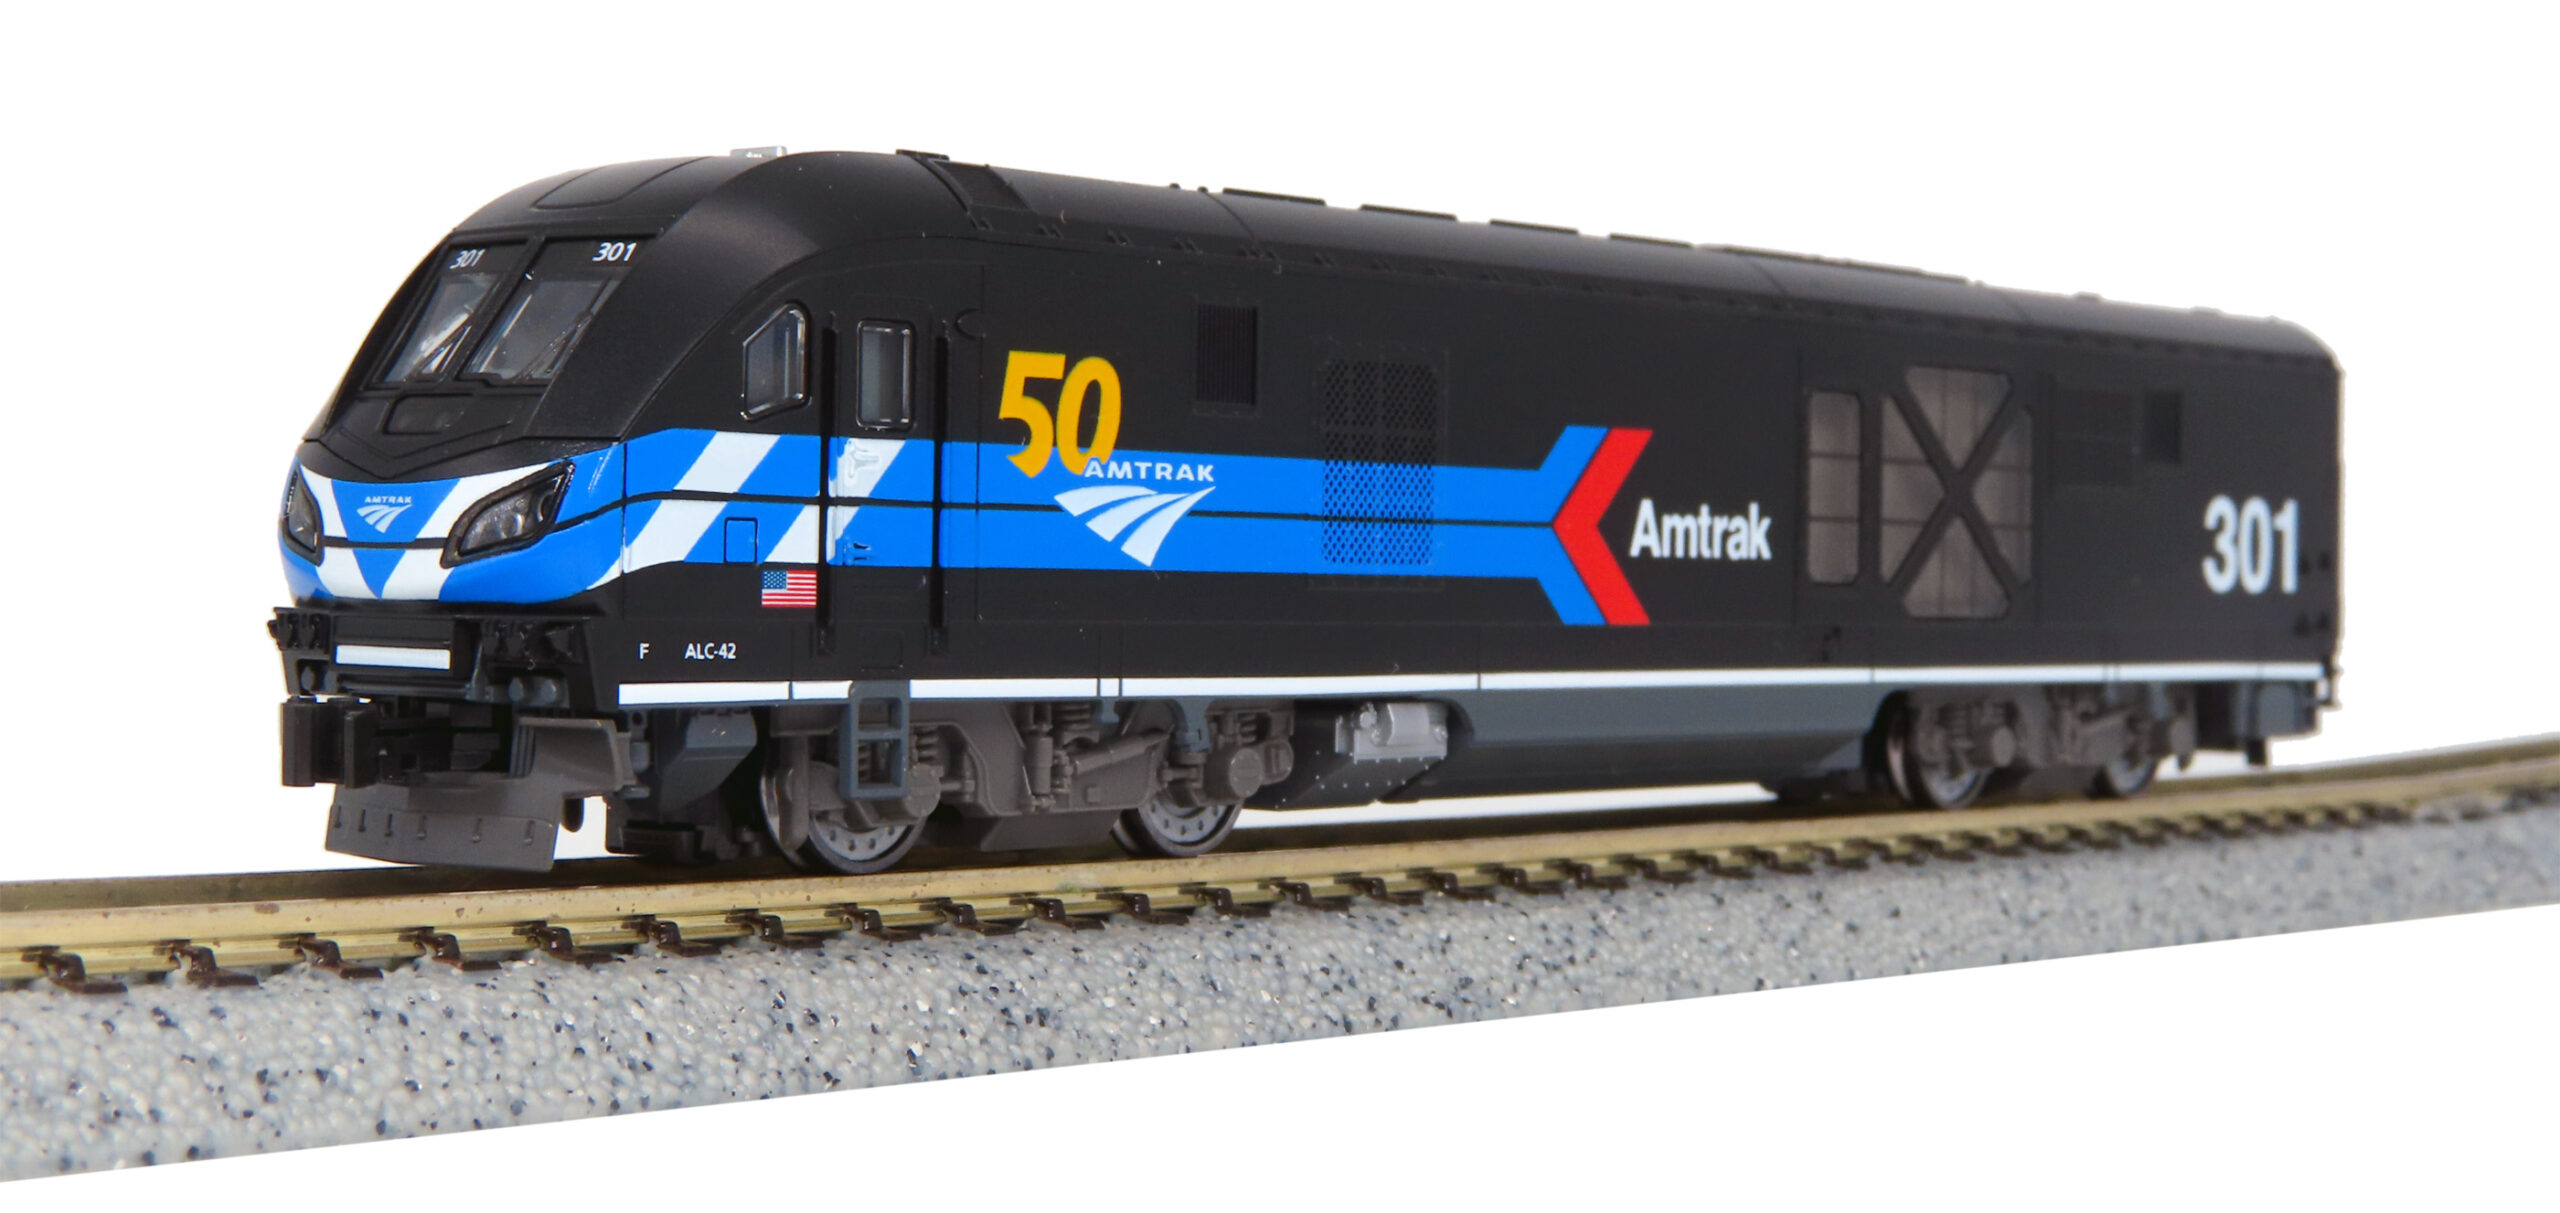 Kato 176-6050  ALC-42 Charger Amtrak "Day One" #301